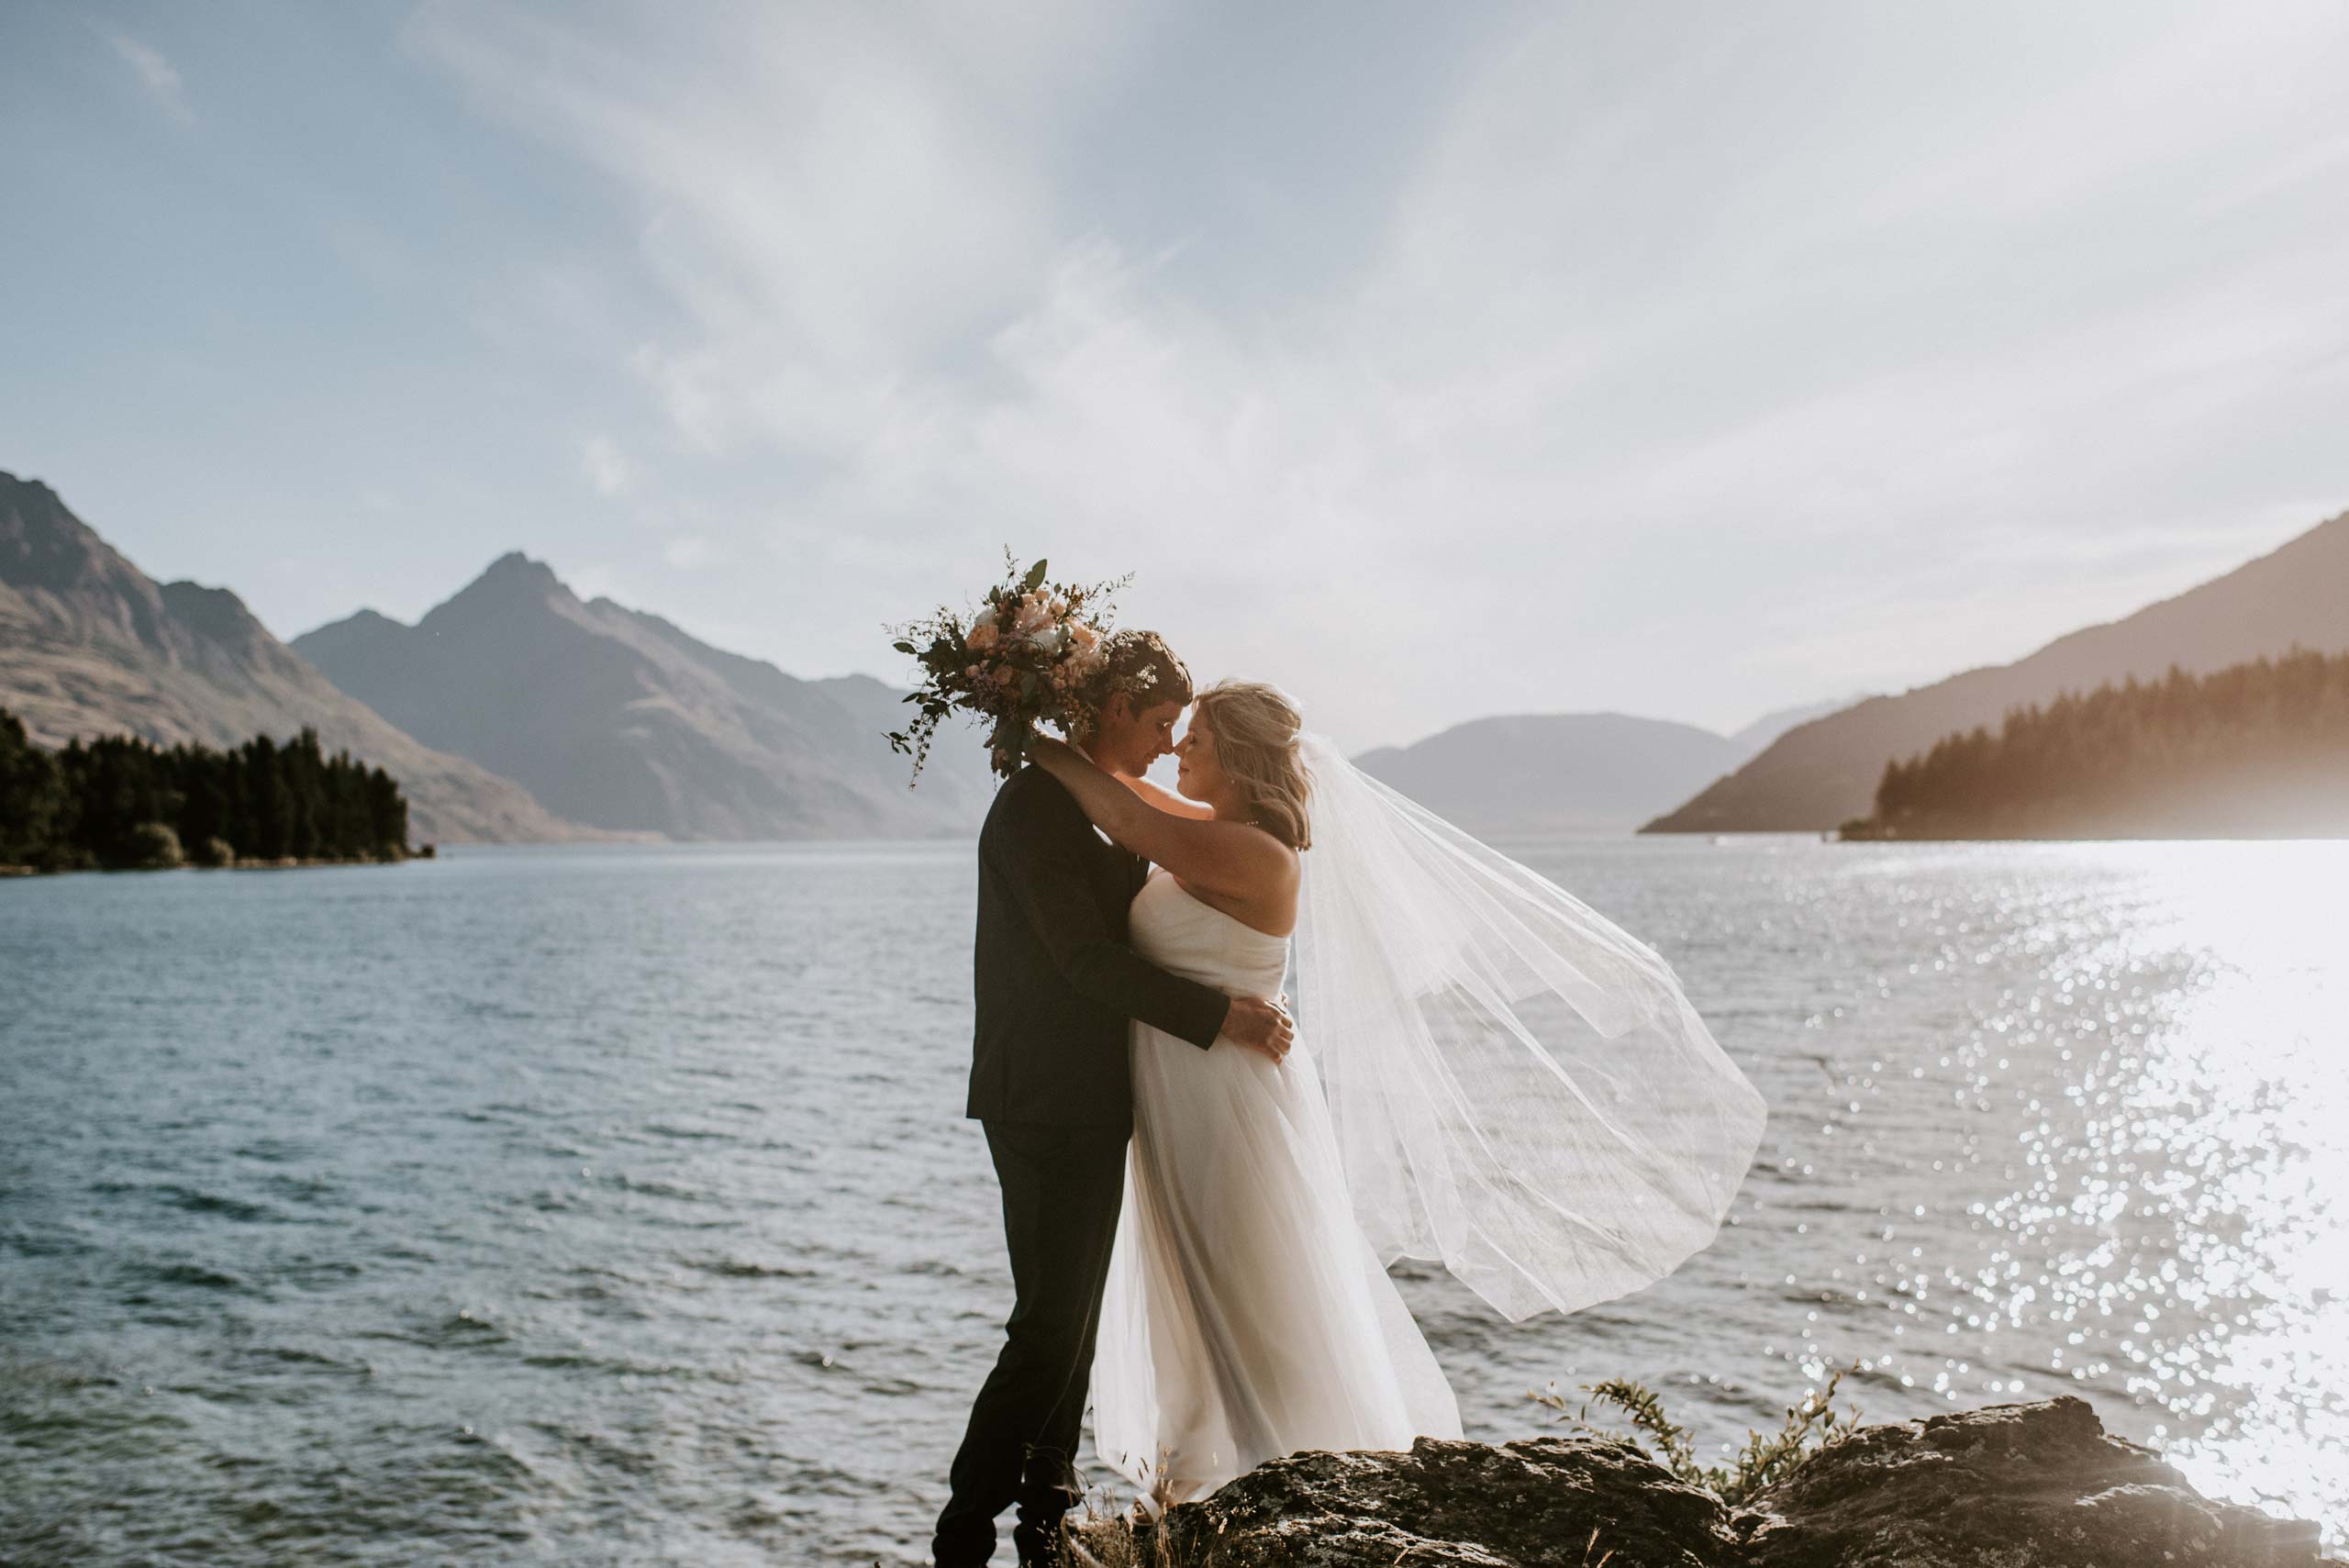 Wedding couple embracing by the lake - Queenstown Wedding Packages